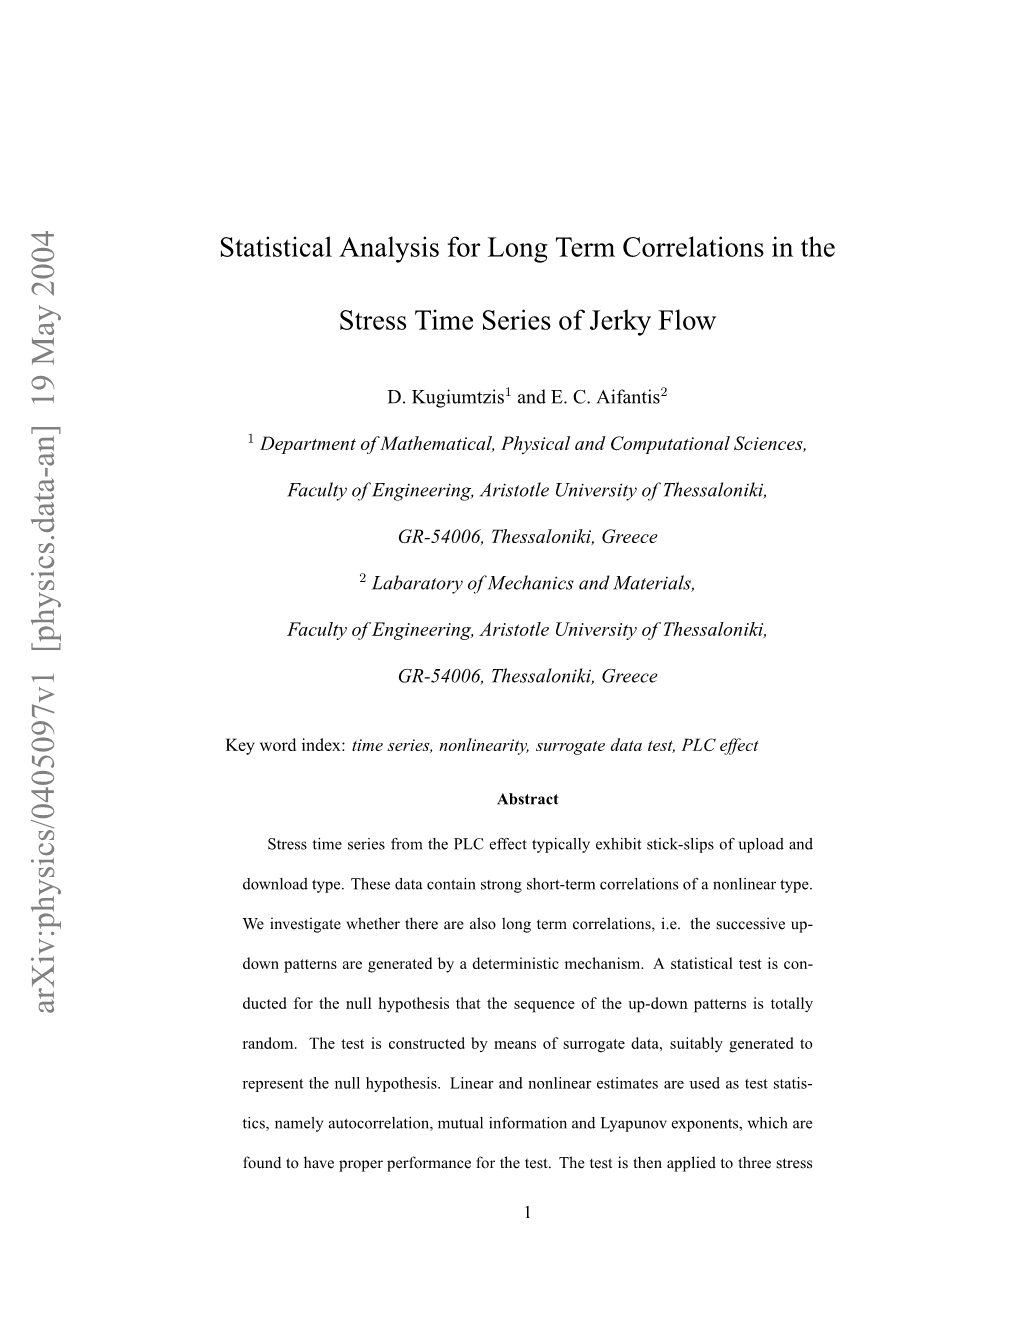 Statistical Analysis for Long Term Correlations in the Stress Time